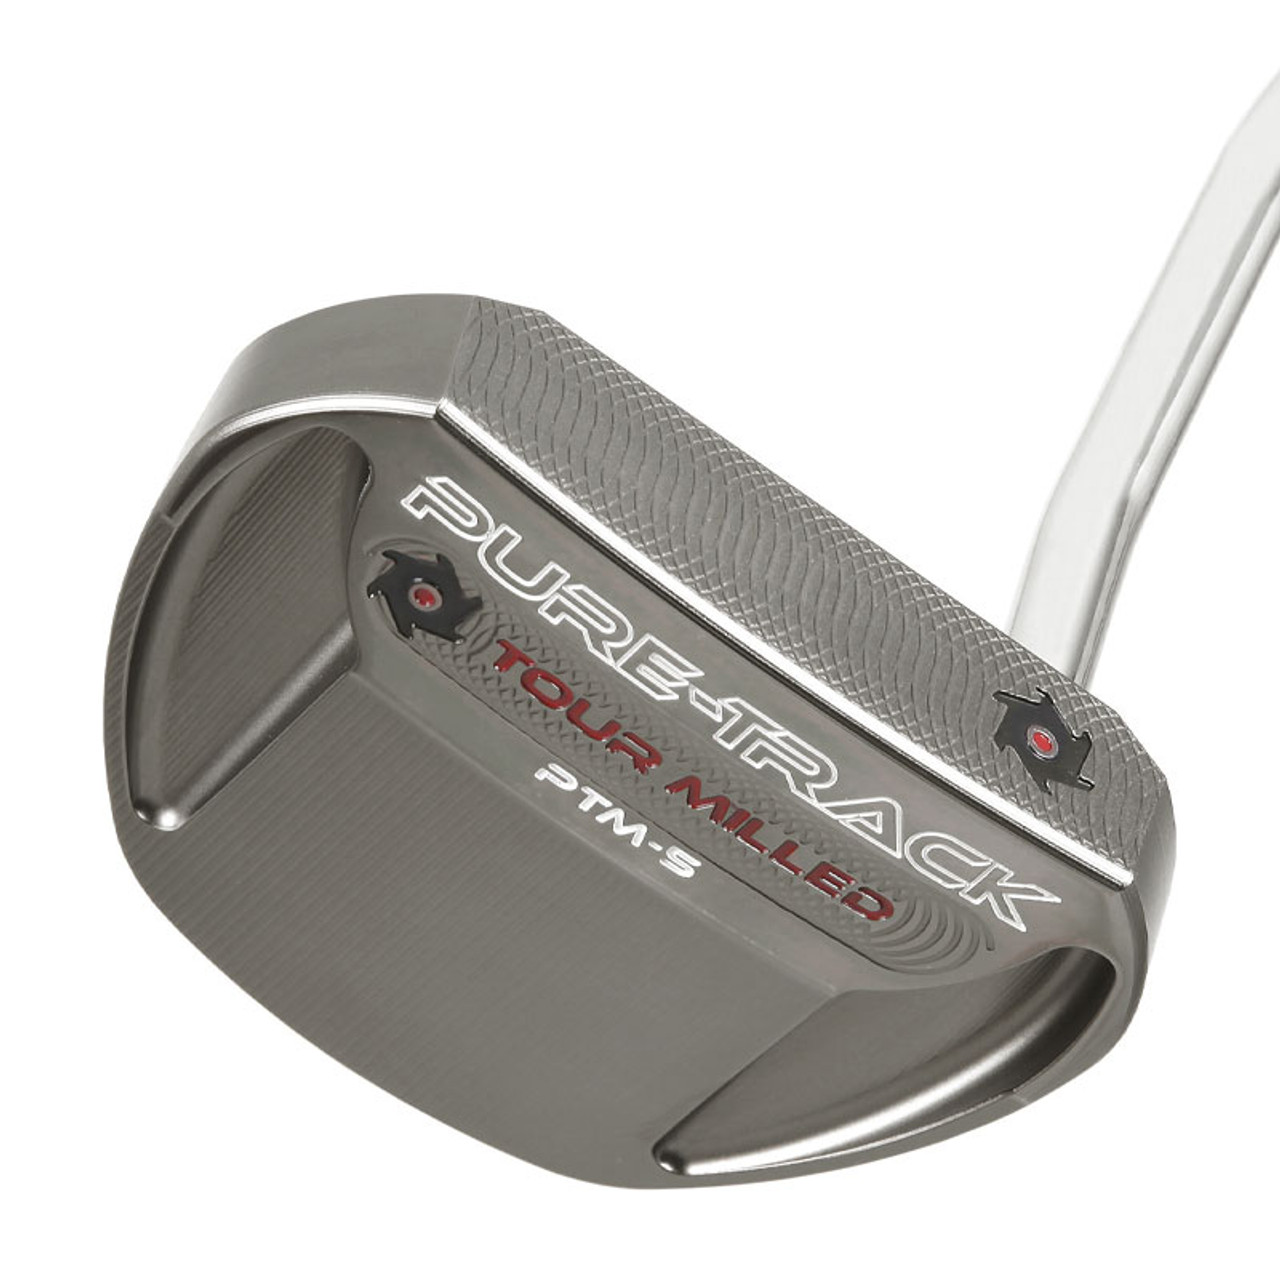 MA Pure-Track Tour Milled PTM-5 Mallet Putter head with head cover ...